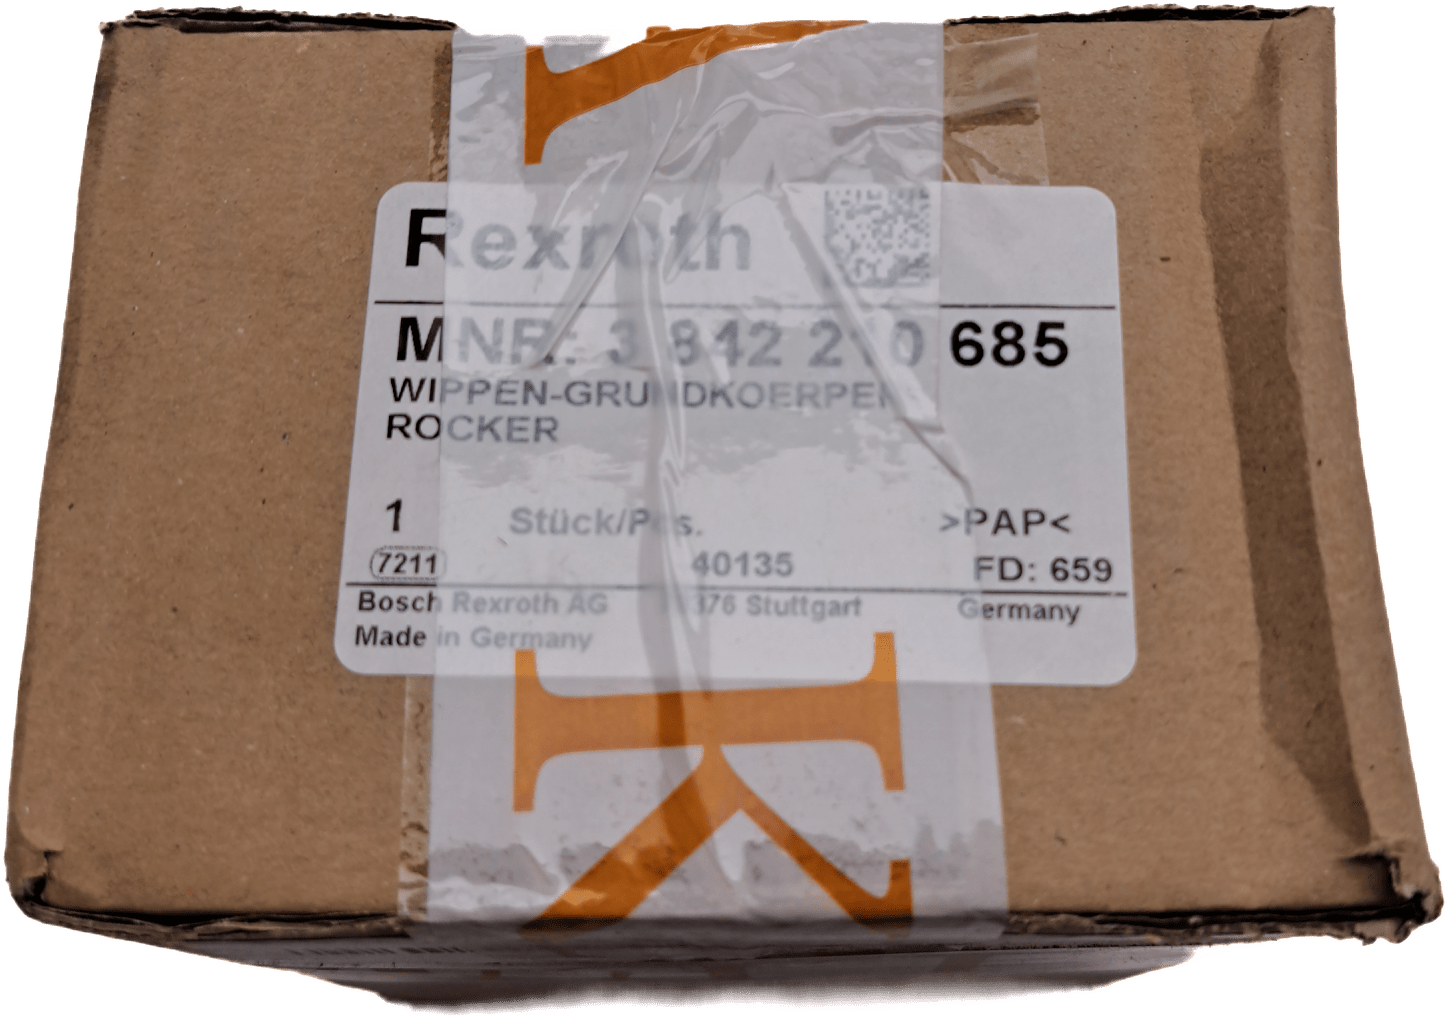 Rexroth / Bosch Wippe WI2 3842210685 - #product_category# | Klenk Maschinenhandel